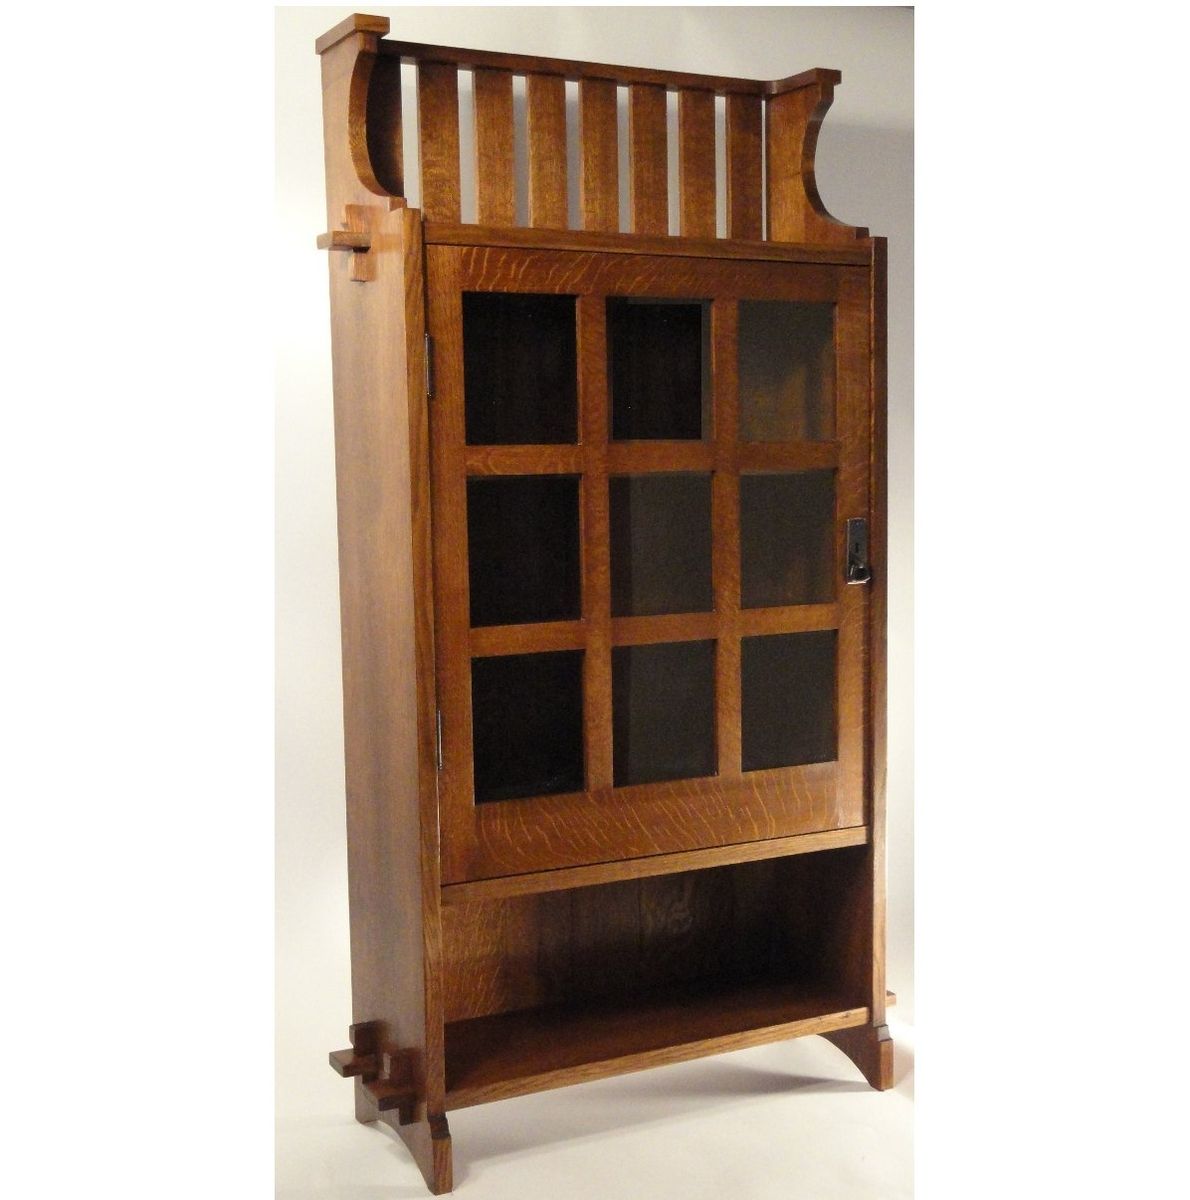 Custom Gustav Stickley Model 512 Reproduction Bookcase By Mostly